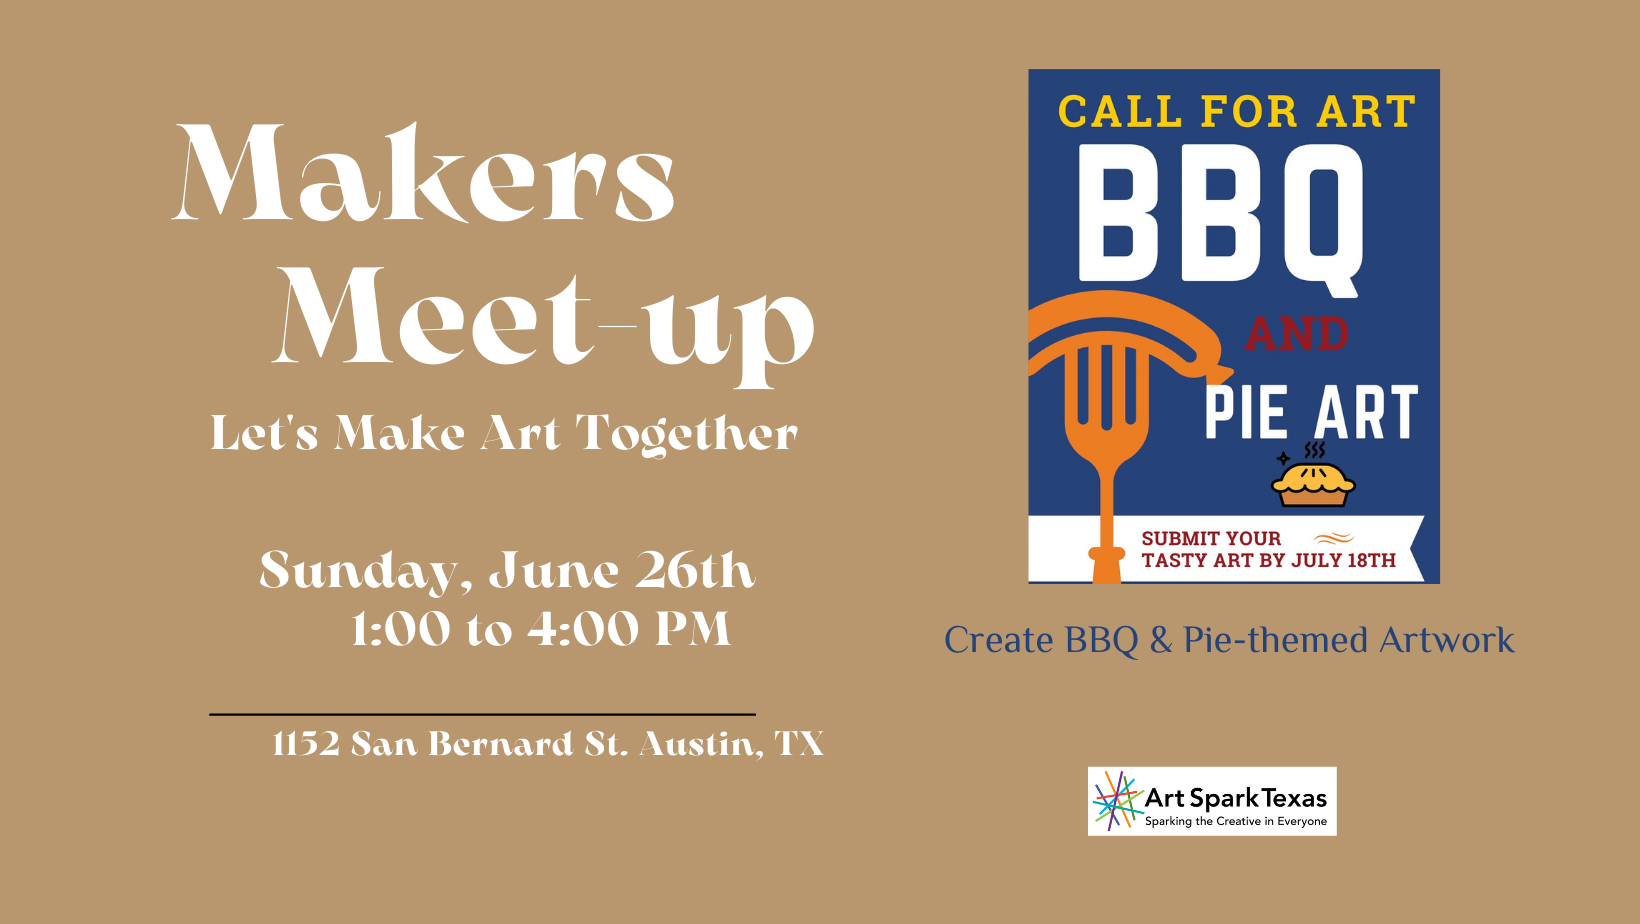 text reads "Makers meet up. Let's make art together. Sunday, June 26th."